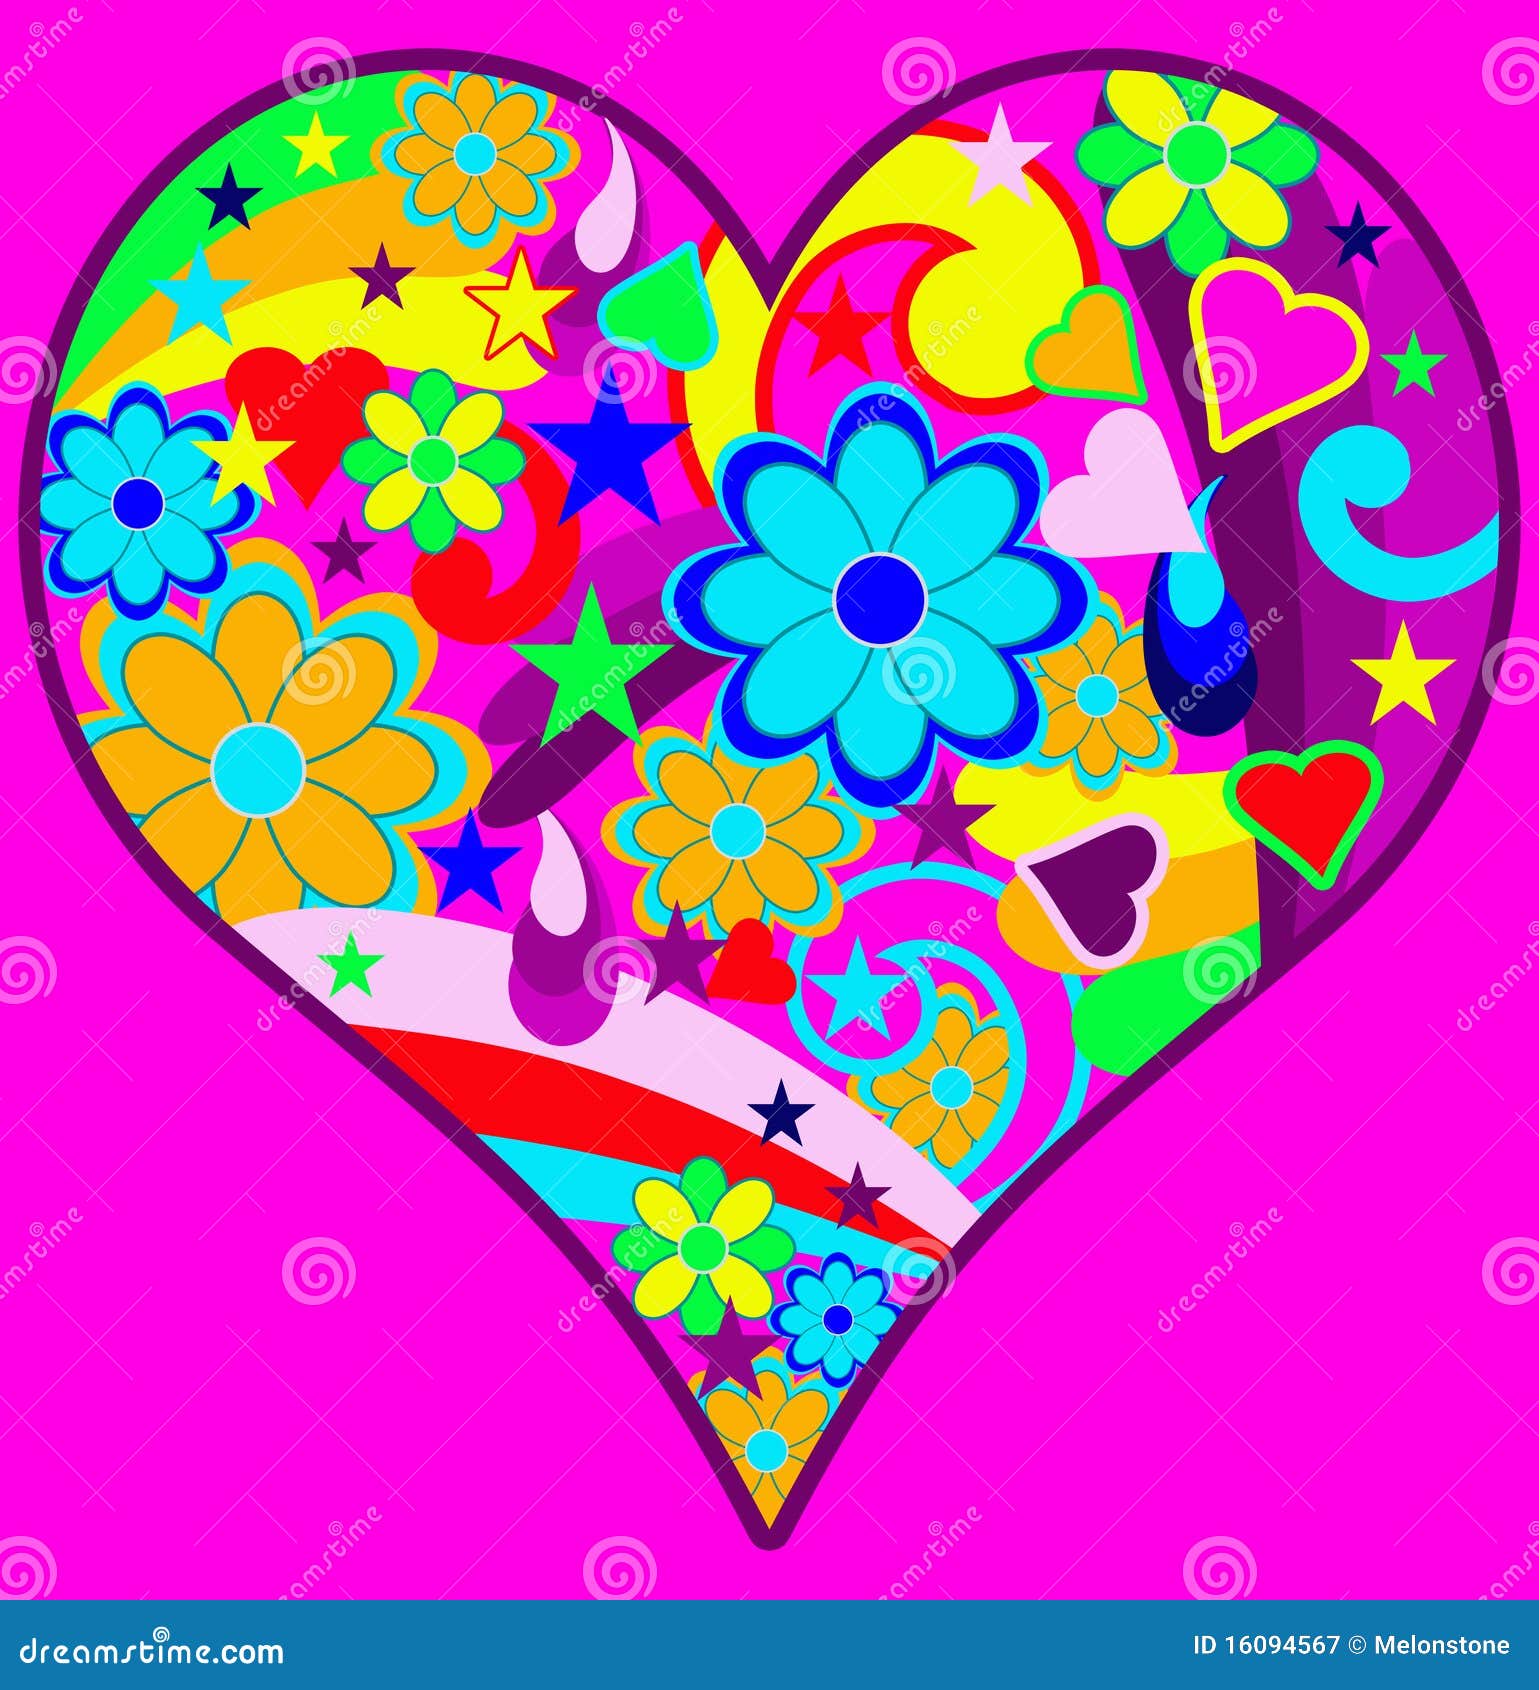 funky retro psychedelic heart